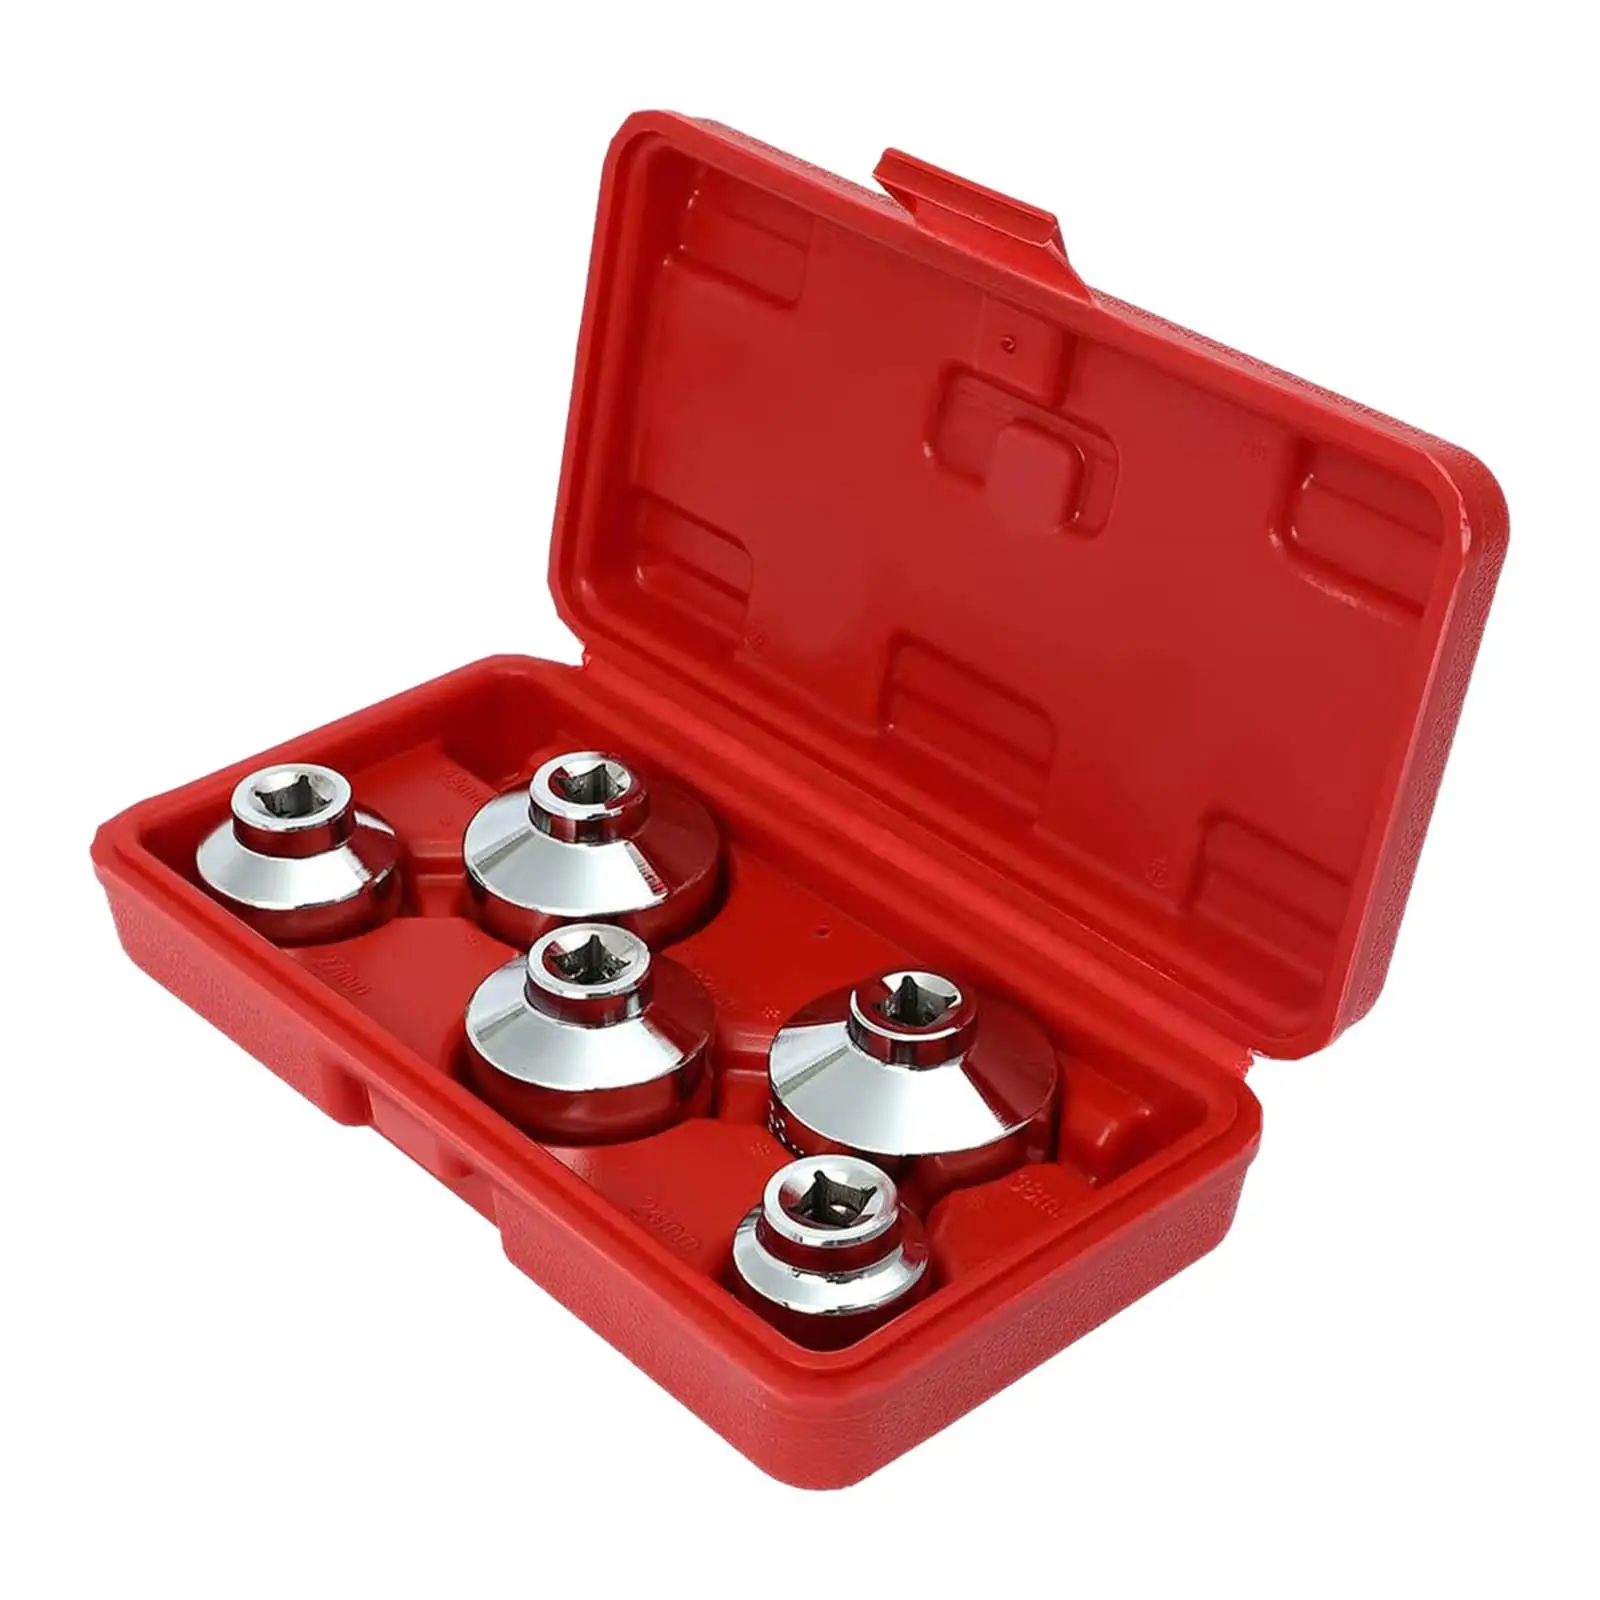 5 Pieces Universal Oil Filter Caps Wrench Socket Set with A Storage Case Drive Cup Type Removal Tool for Hyundai for Kia for GM